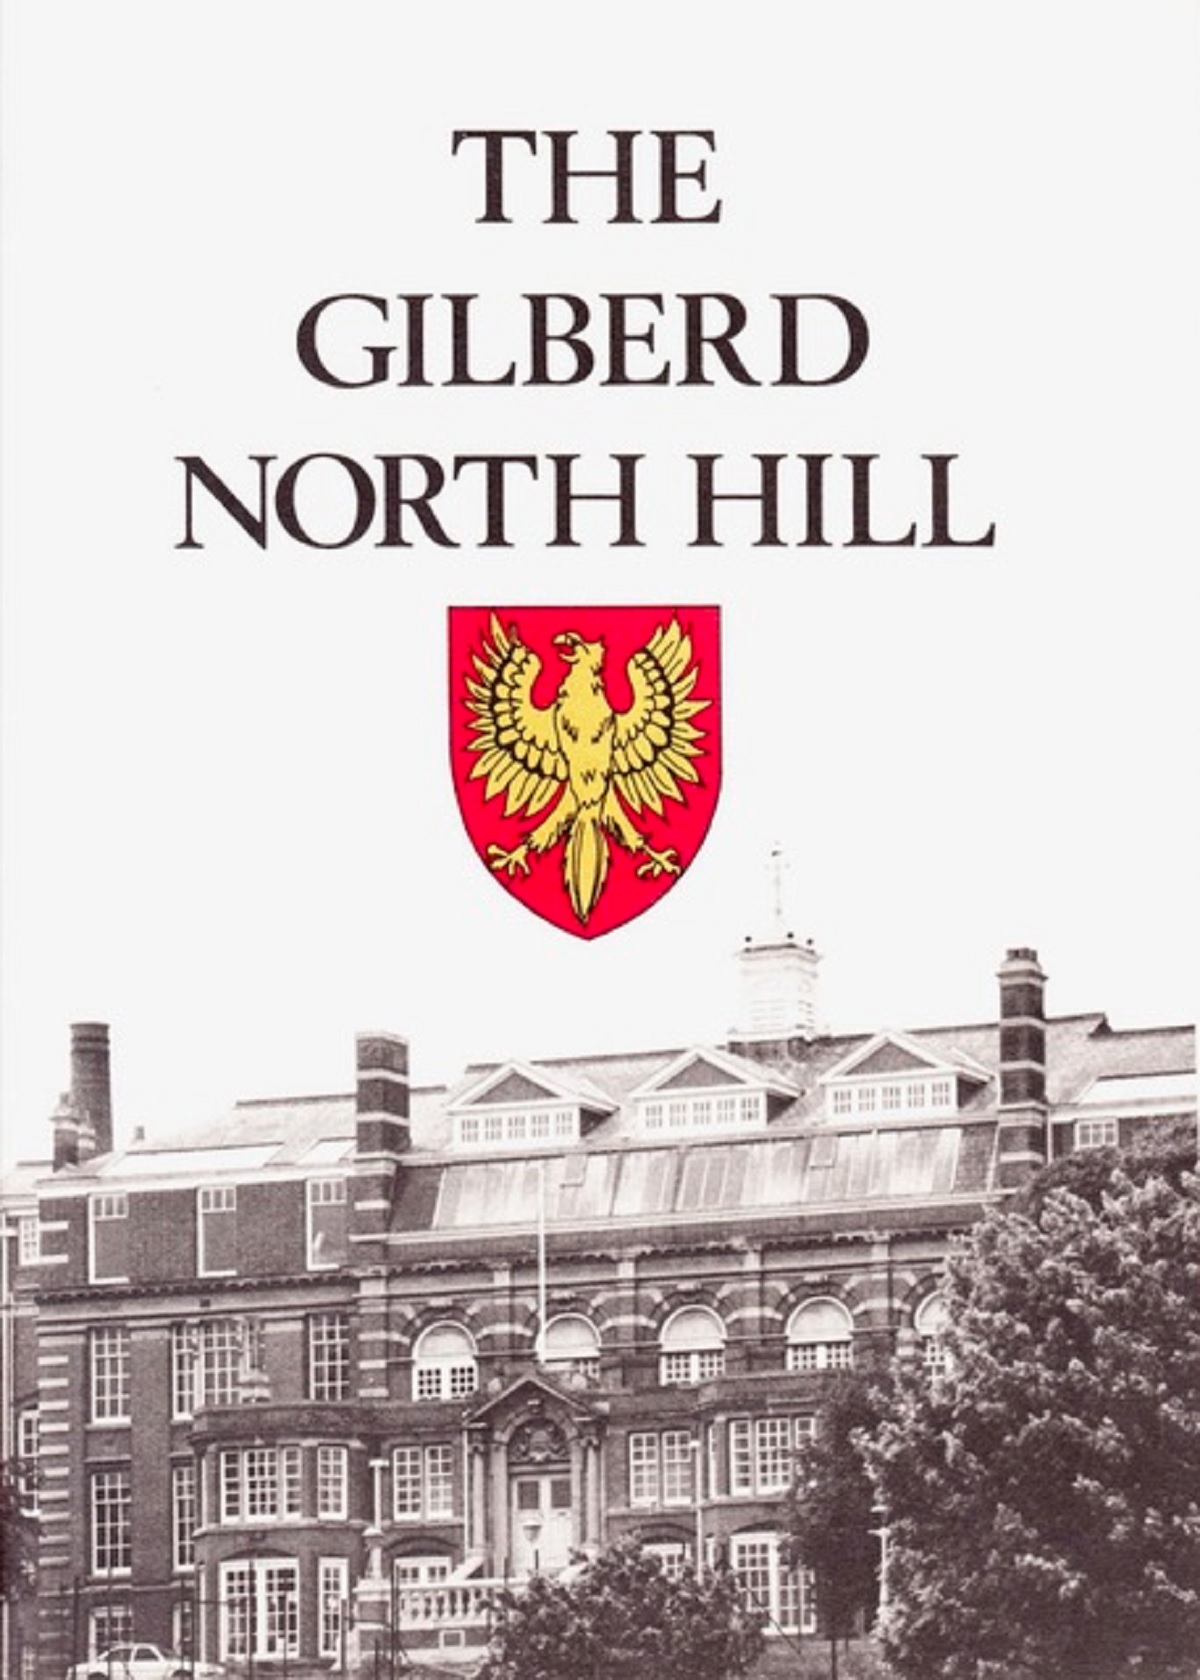 Front cover - Mr Ross book, called ‘The Gilberd North Hill’. Visitors to the site can download a copy for free